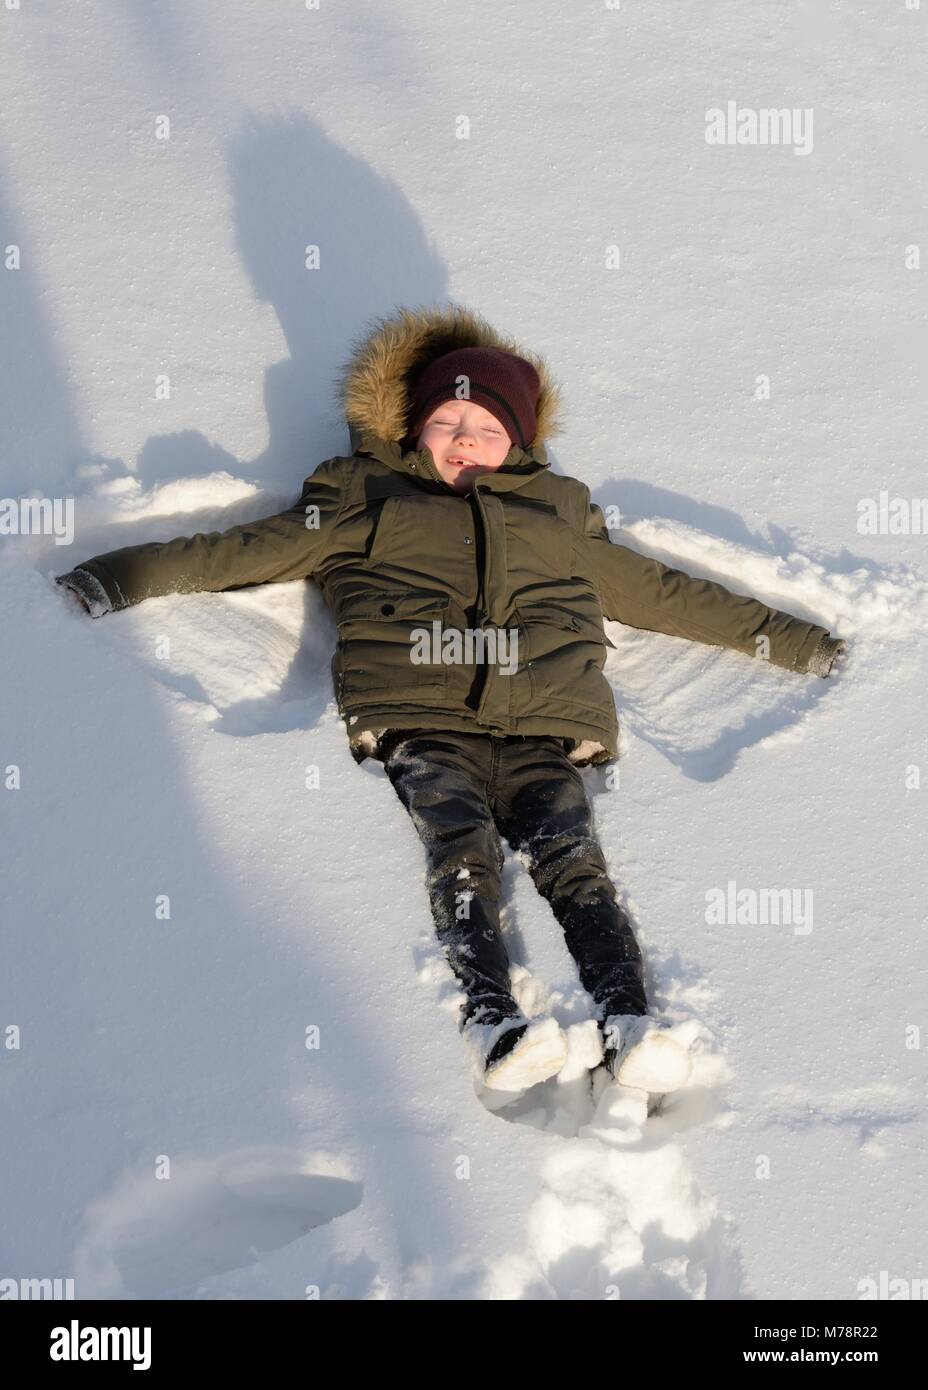 A young boy lying on his back in deep snow making angel wings shot from  above Stock Photo - Alamy